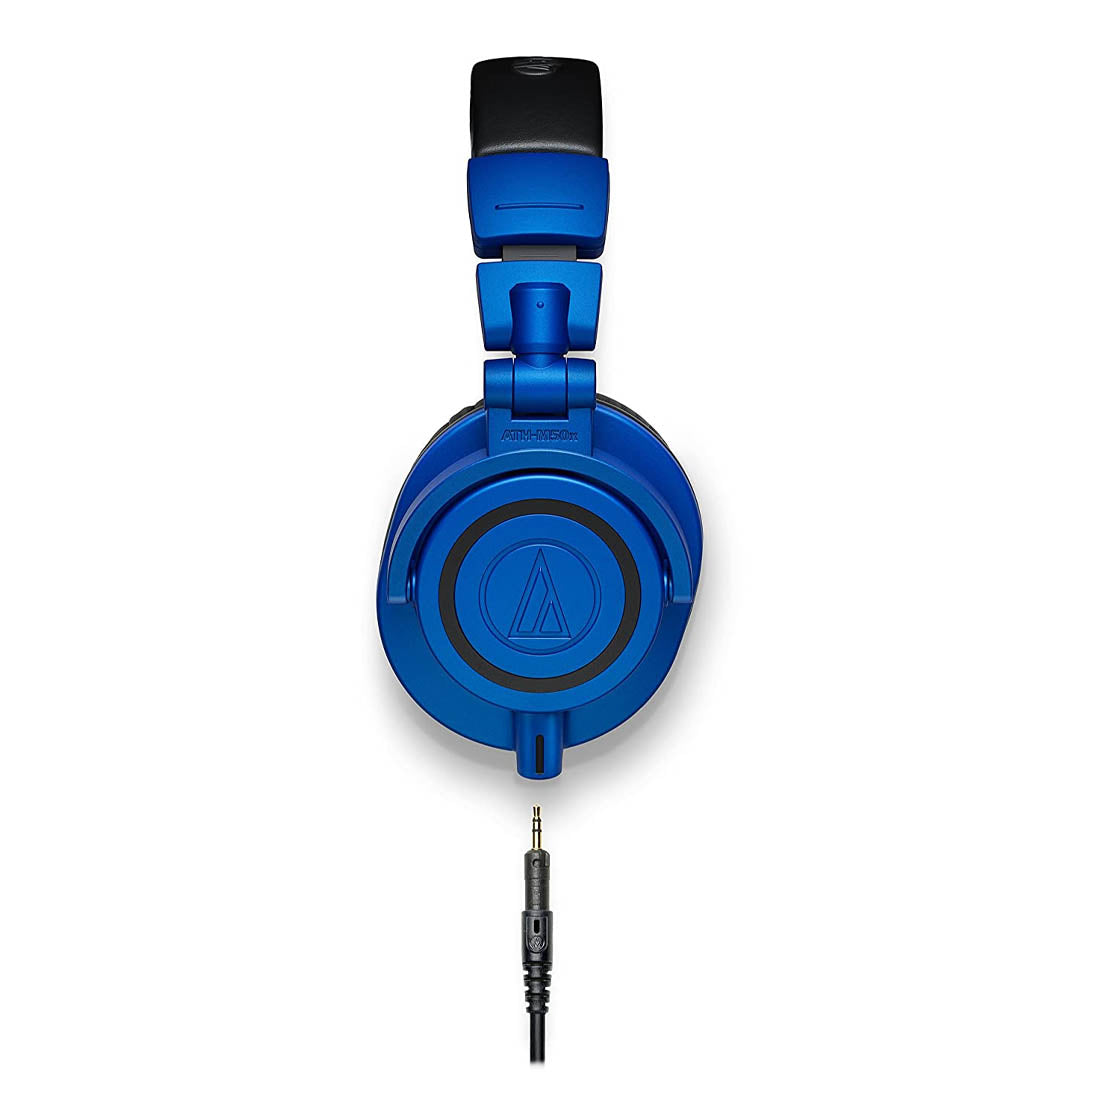 Audio-Technica ATH-M50x Over-Ear Wired Headphone with 45mm Neodymium Driver - Blue